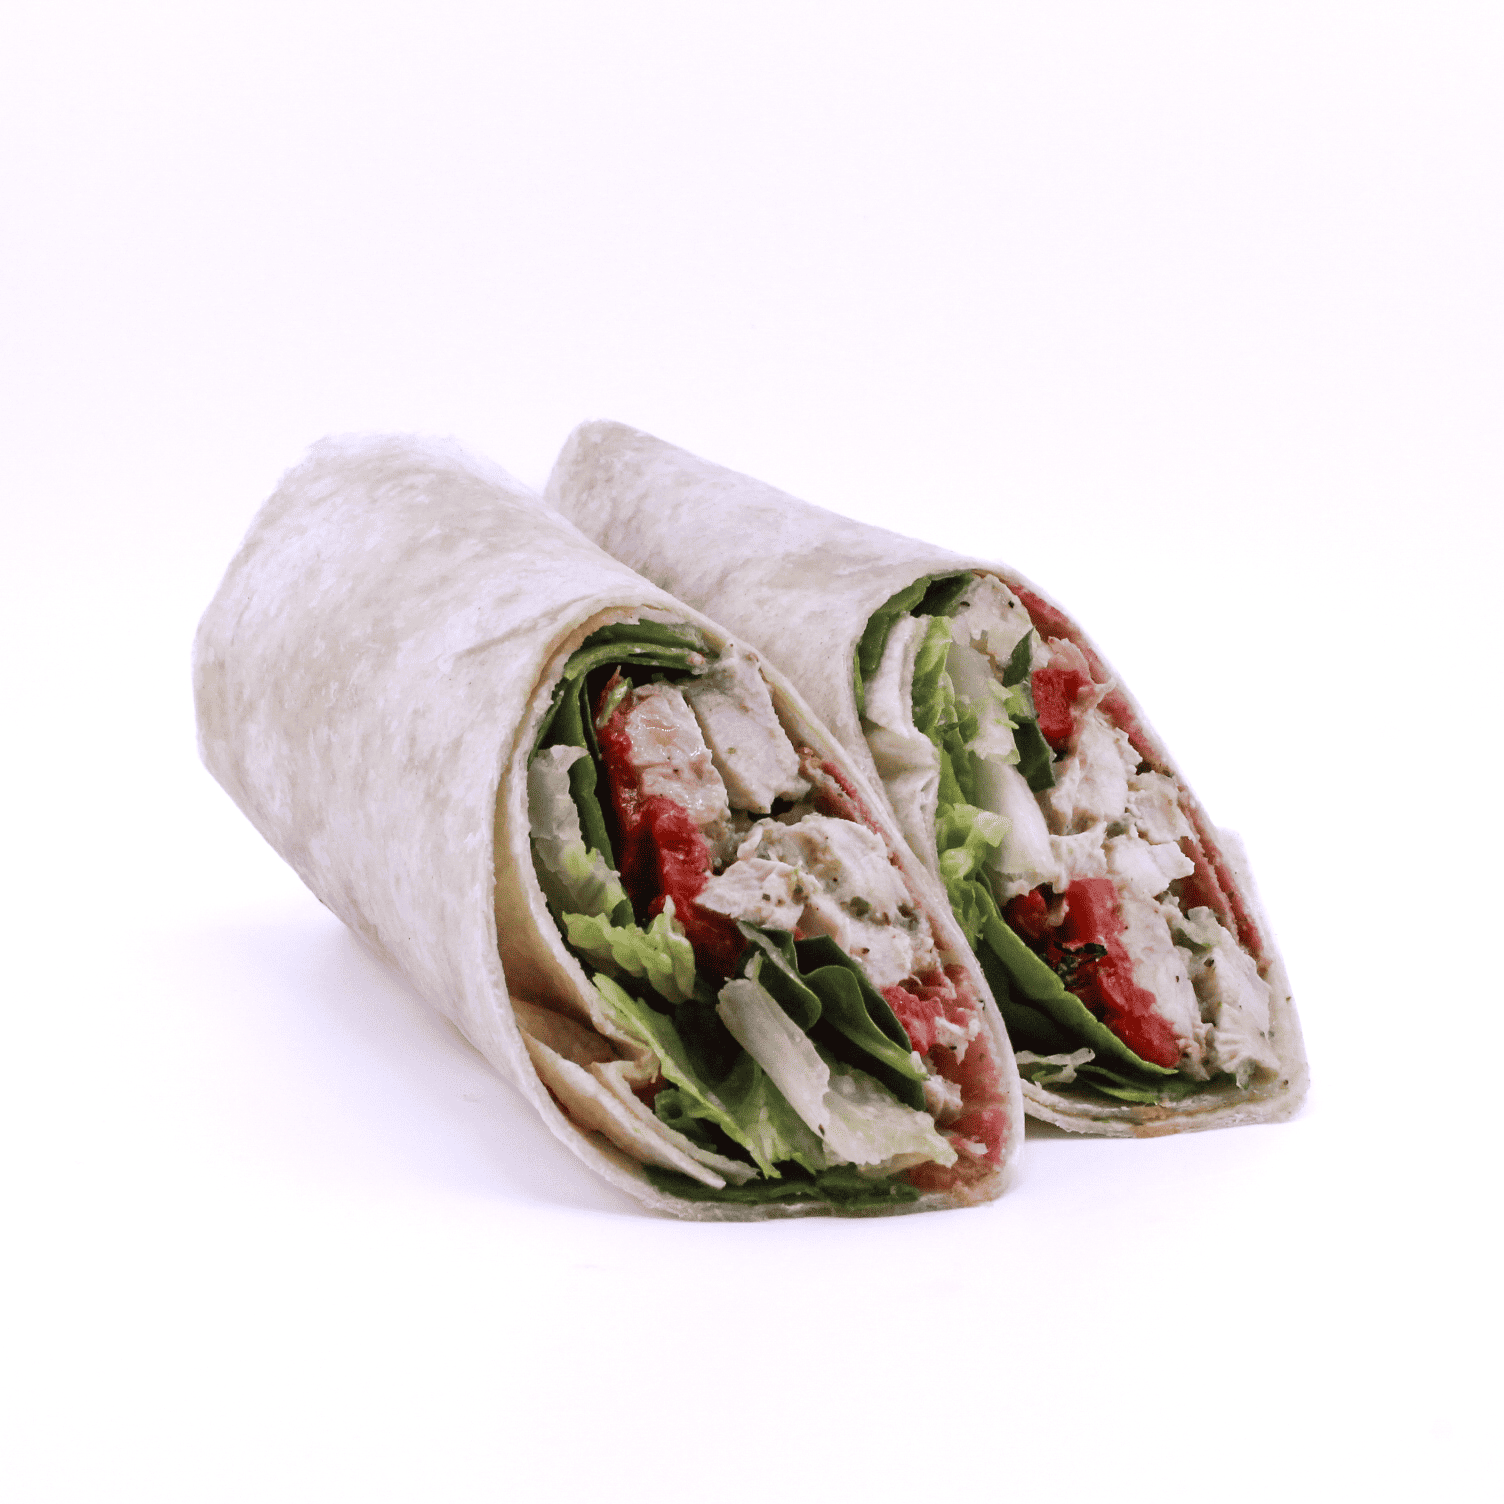 Chicken Goodness (Wrap) - Green goodness chicken salad, bacon, roasted red peppers, mixed greens, roasted tomatoes wrapped in a flour tortilla